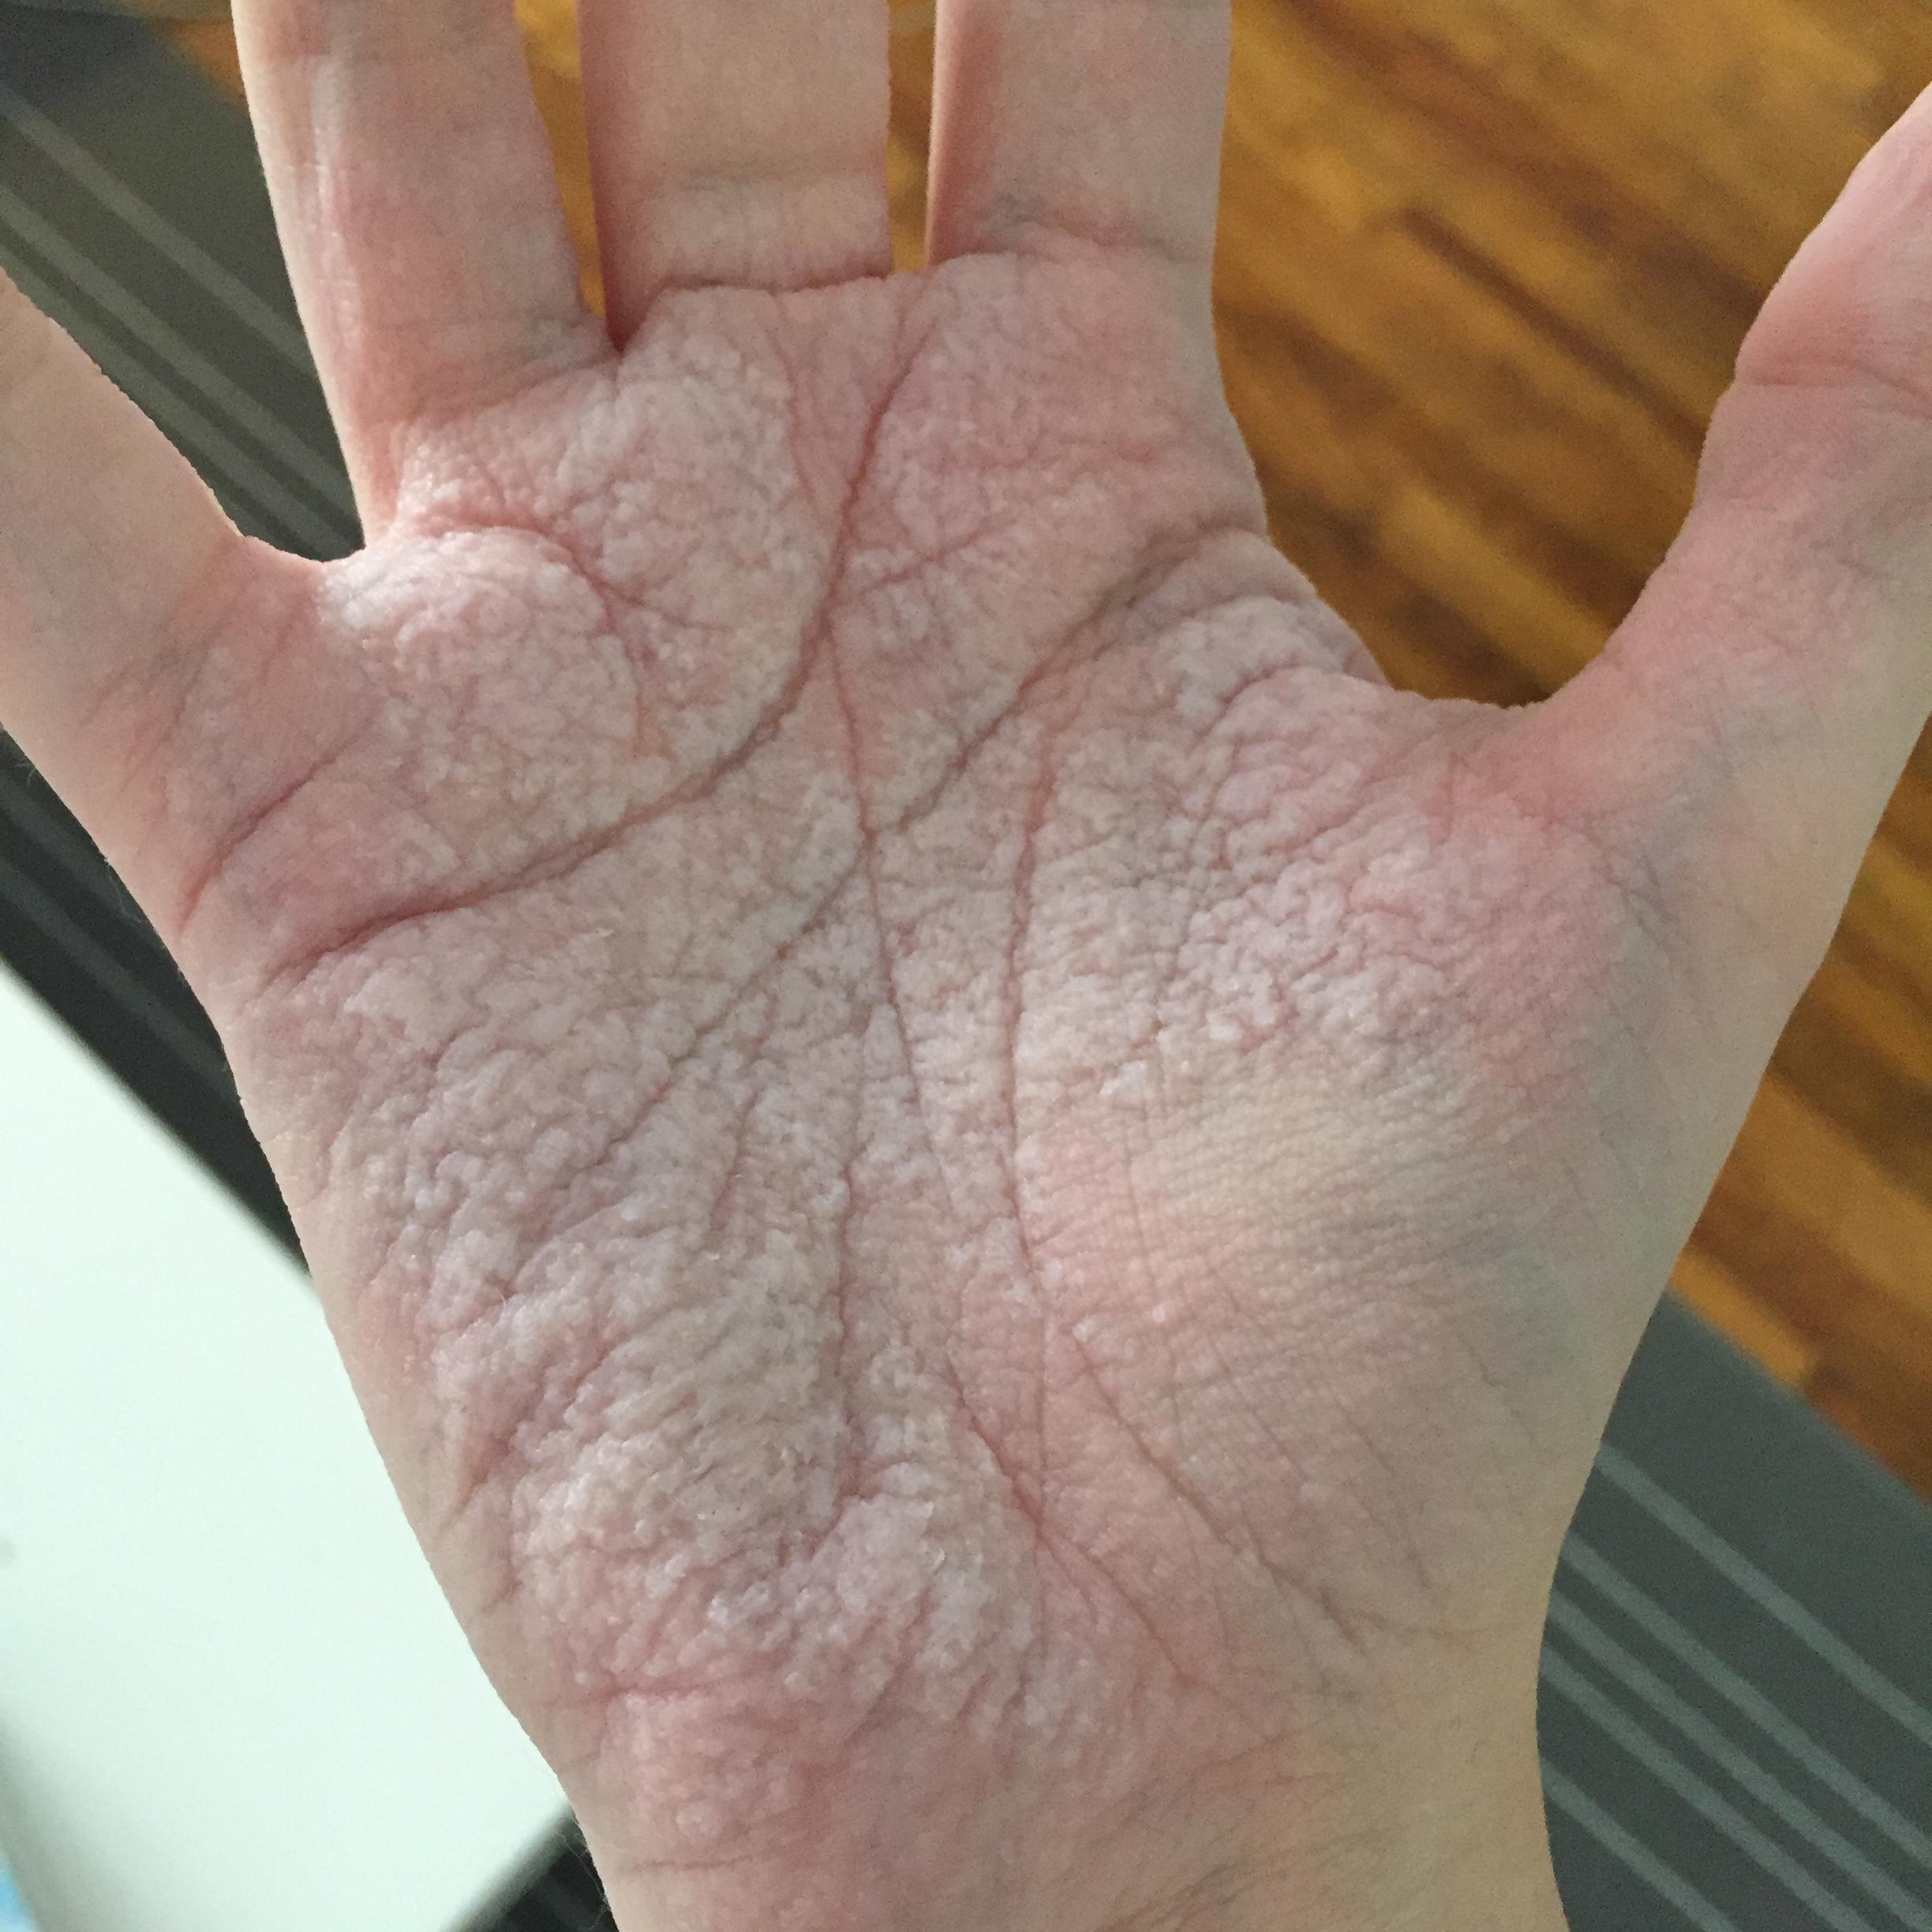 This man has a water sensitivity. This is his hand after a 15-minute shower.